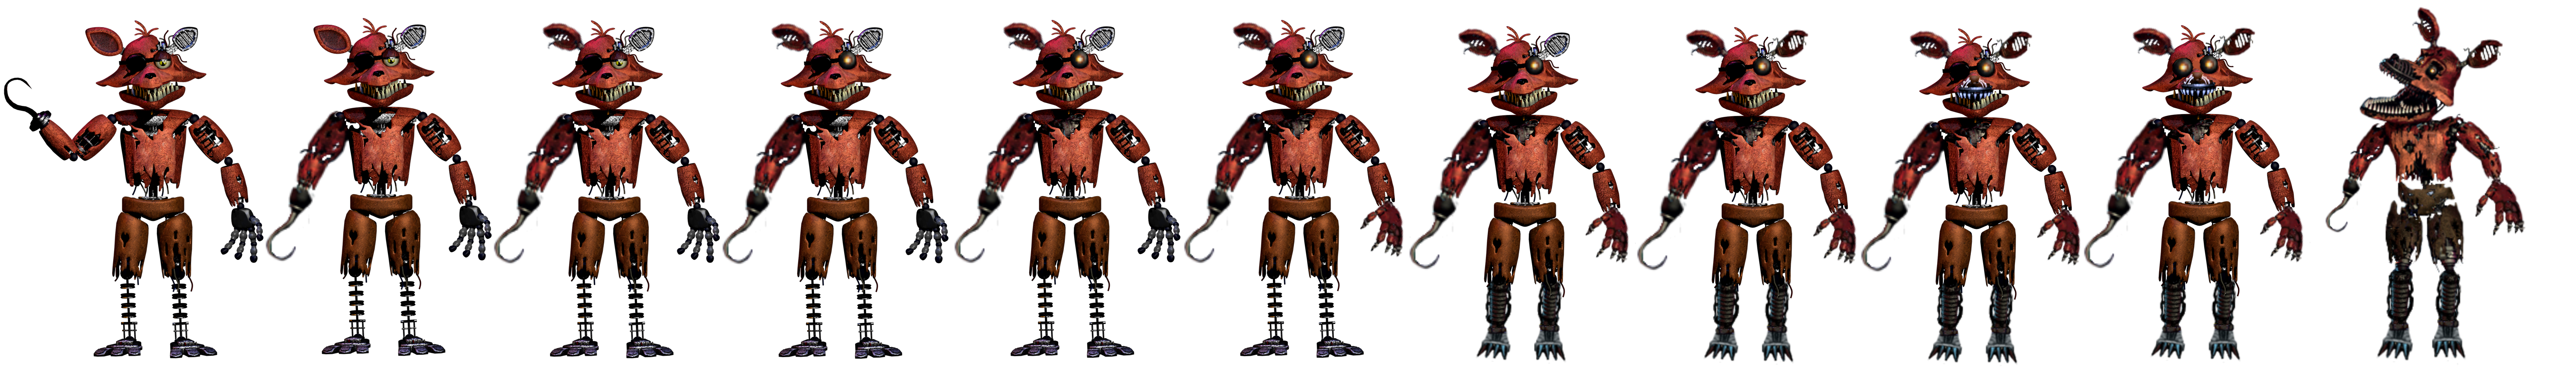 The Joy Of Creation] Withered Foxy by NightmareBonnie730 on DeviantArt